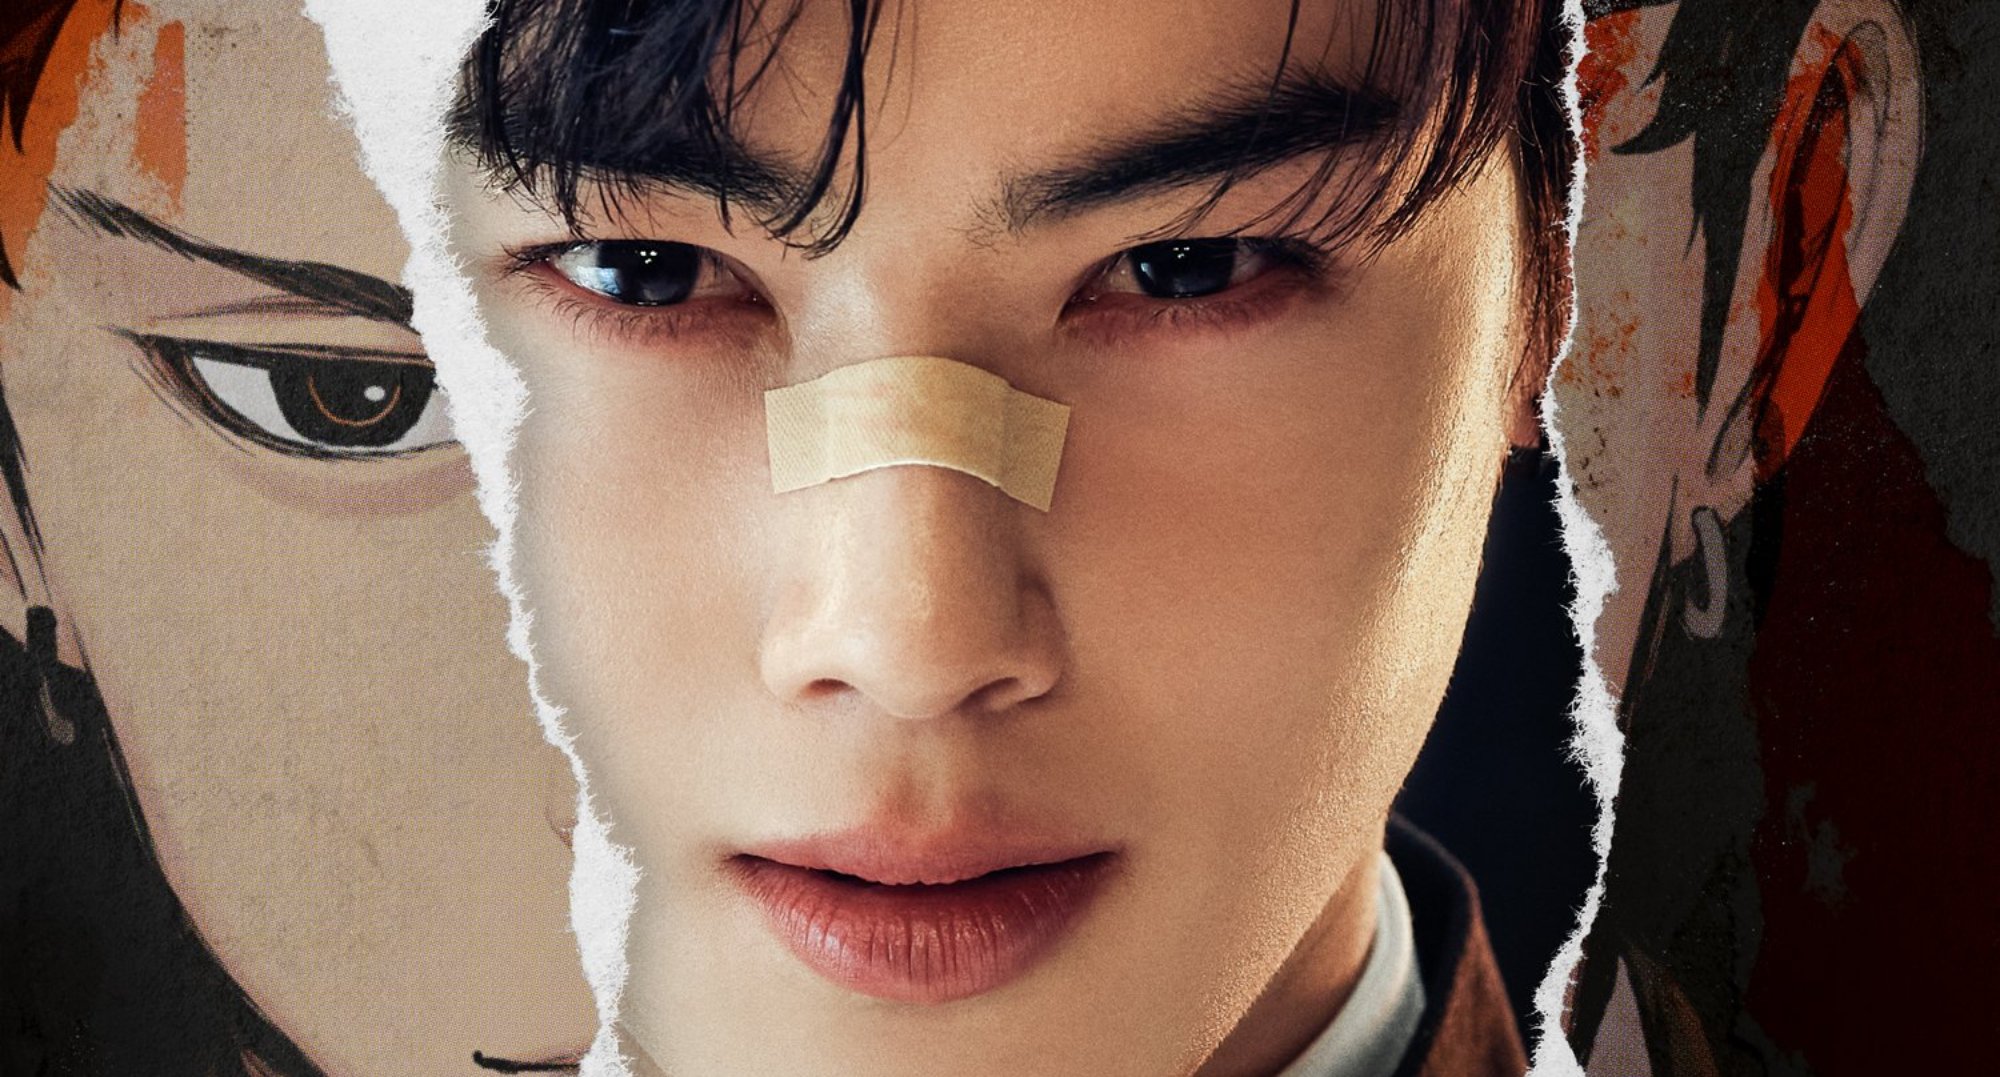 ASTRO Cha Eun Woo Updates Fans With New Photos